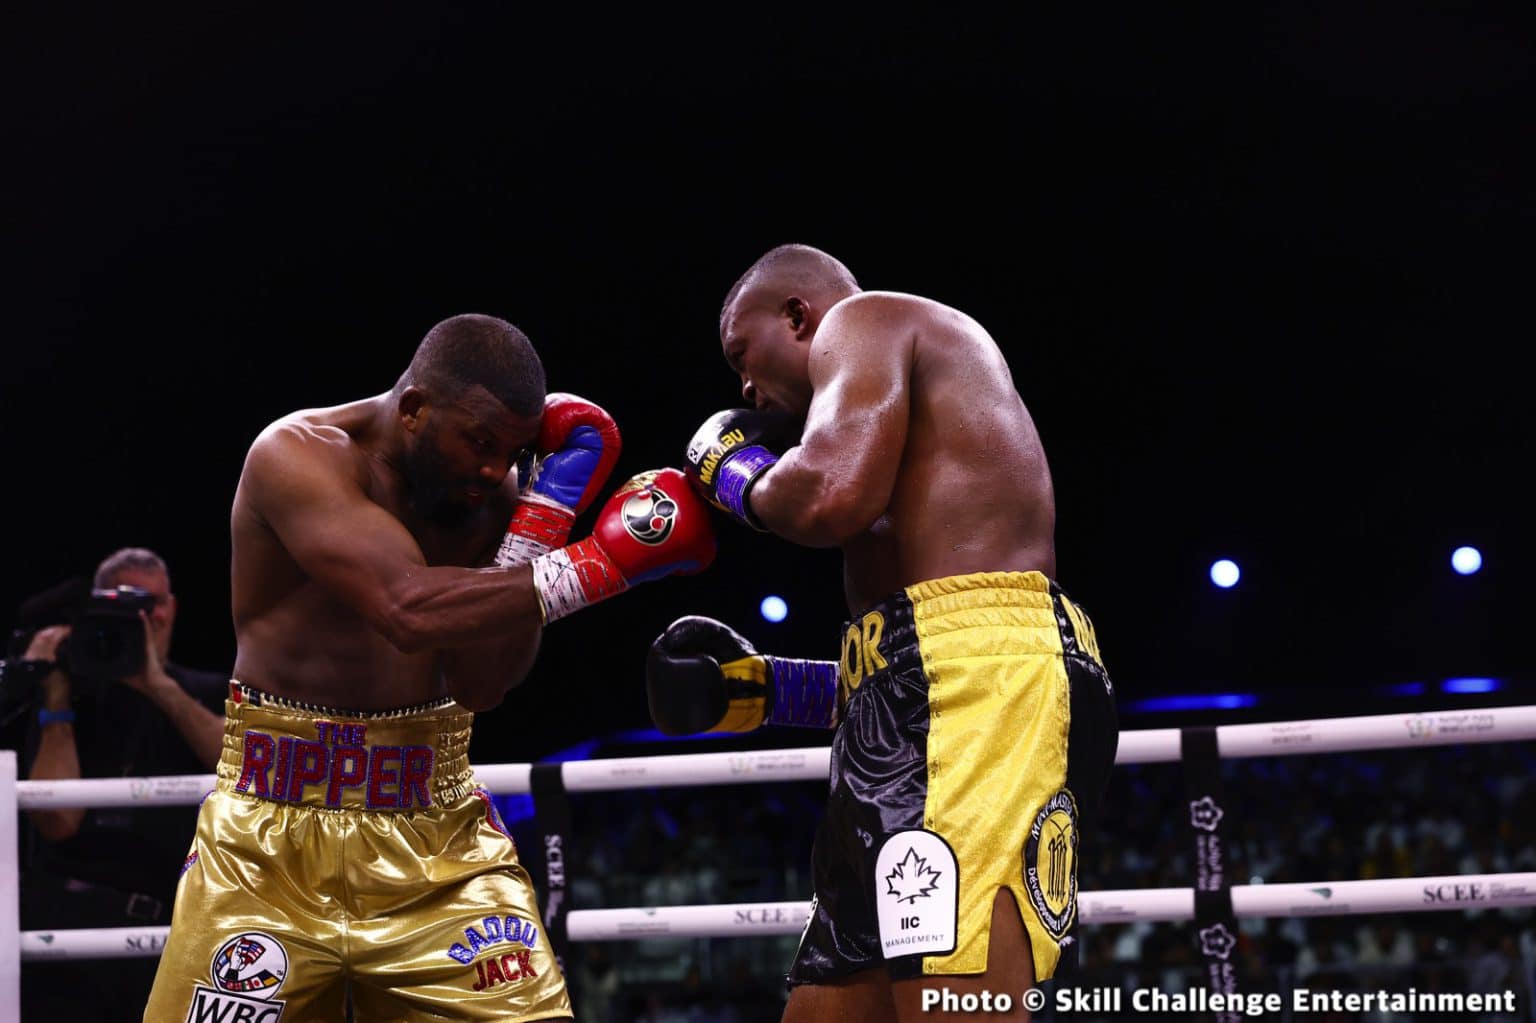 Image: Boxing results: Badou Jack “The Ripper” & Tommy “TNT” Fury Win!